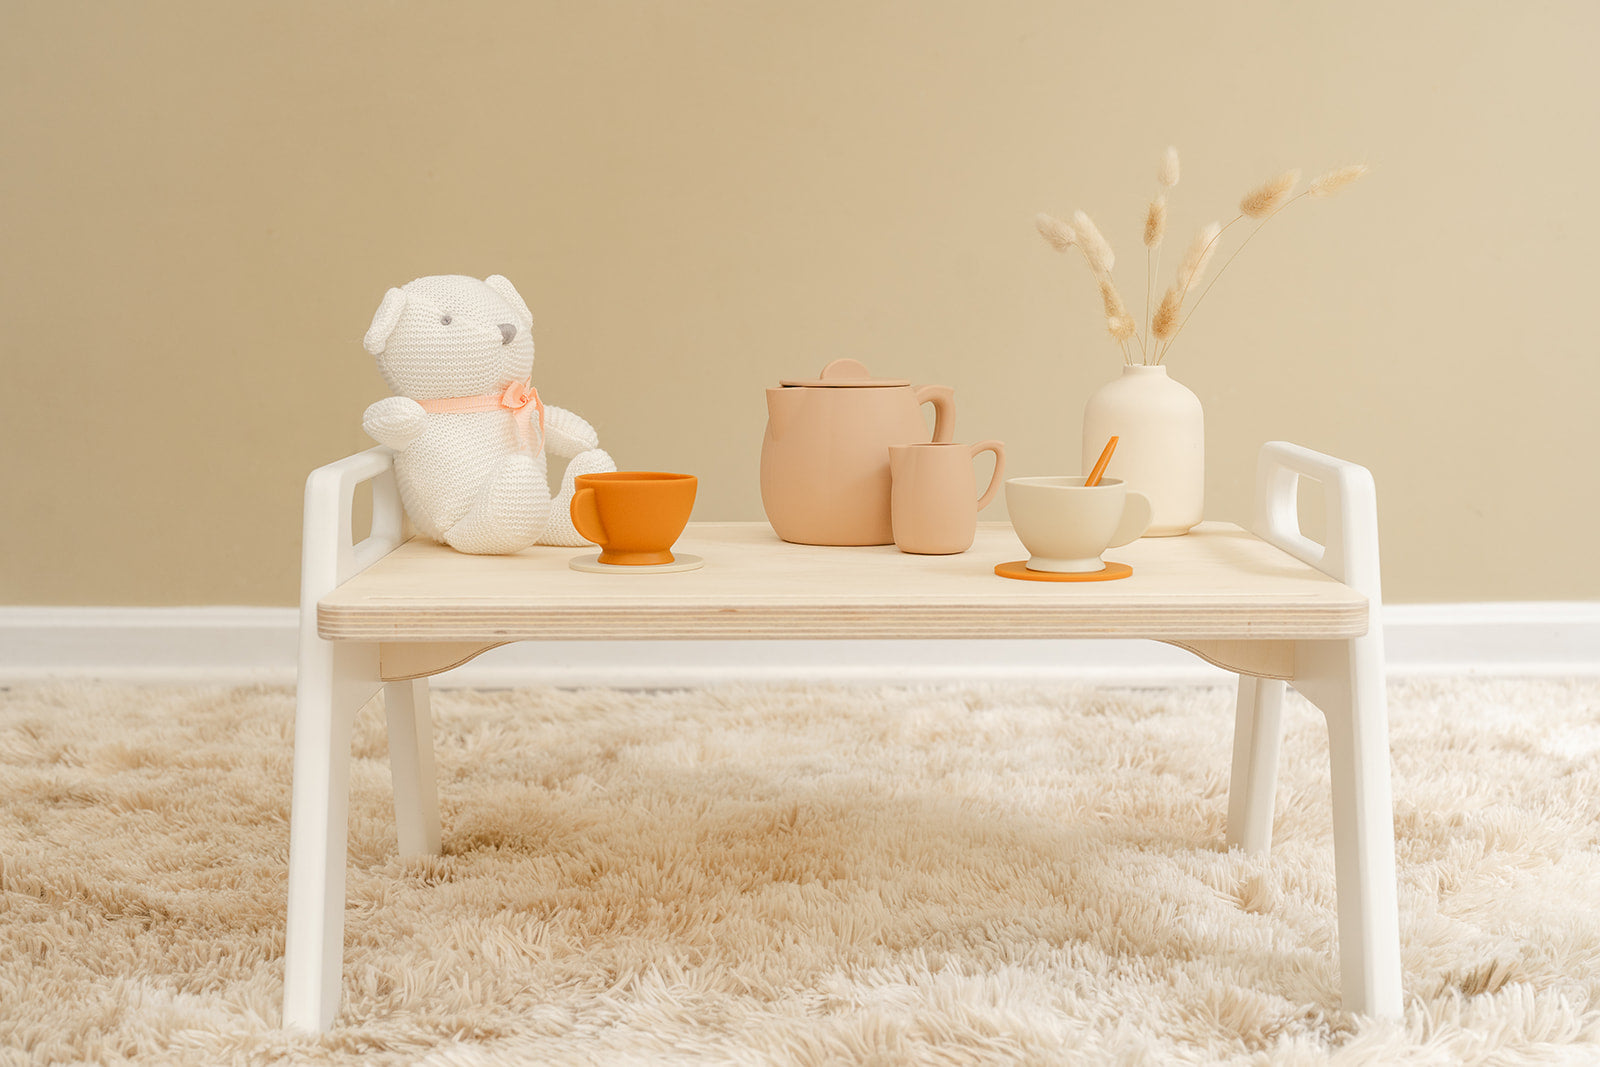 A childrens play tray with a tea set on top ready to play with